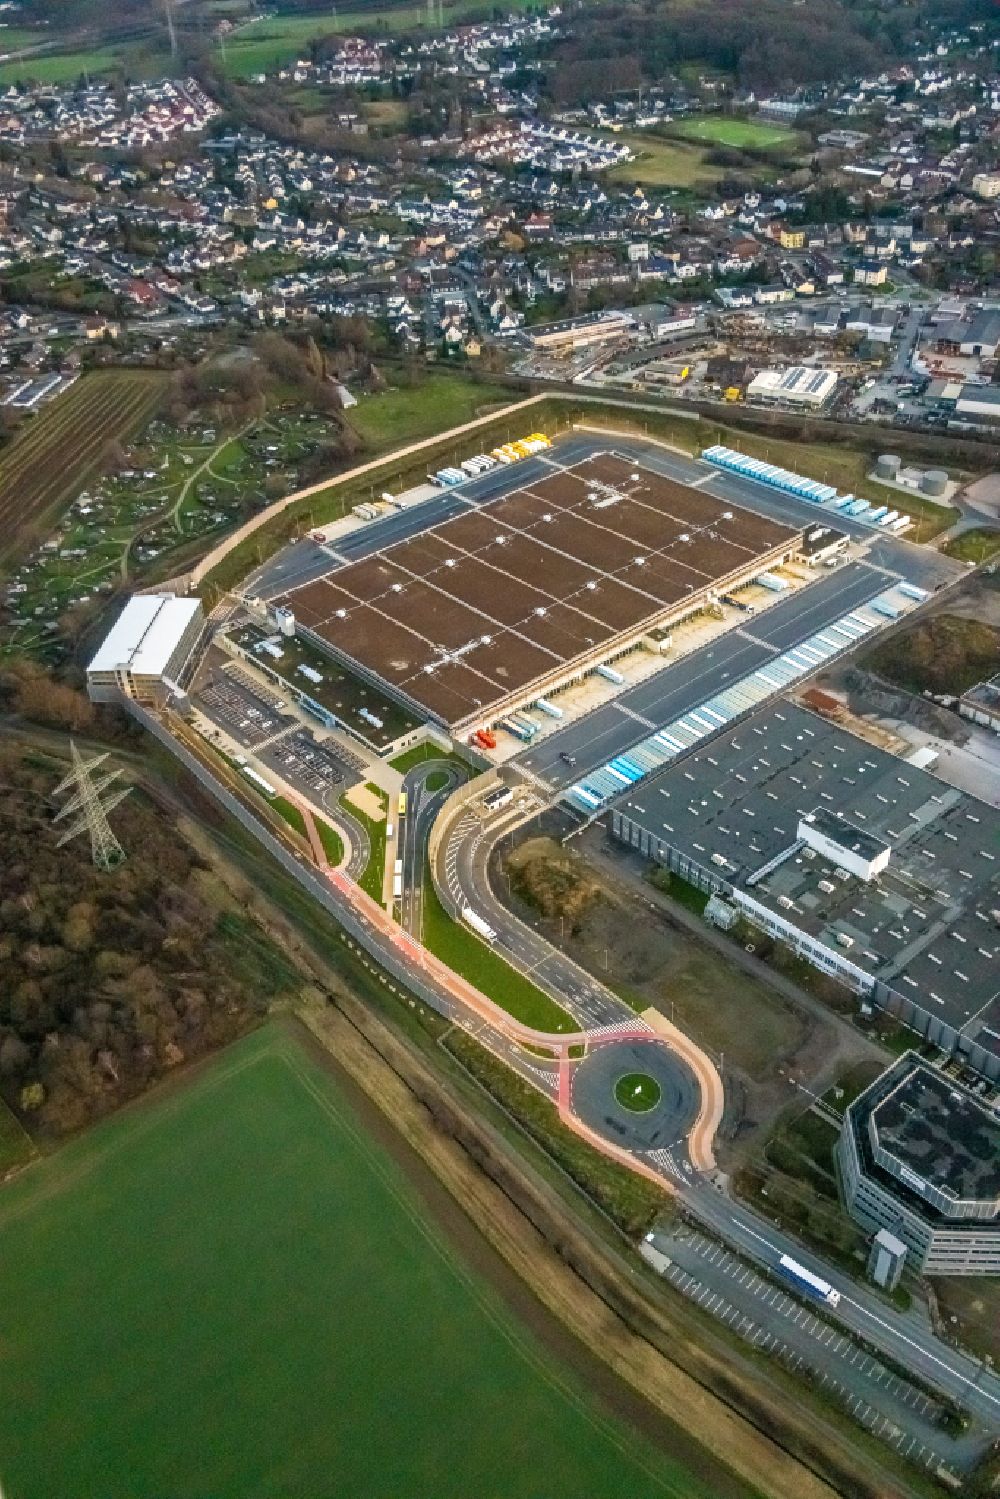 Aerial photograph Rüdinghausen - Building complex and grounds of the logistics center with a new Amazon building on Menglinghauser Strasse - Siemensstrasse in Ruedinghausen at Ruhrgebiet in the state North Rhine-Westphalia, Germany